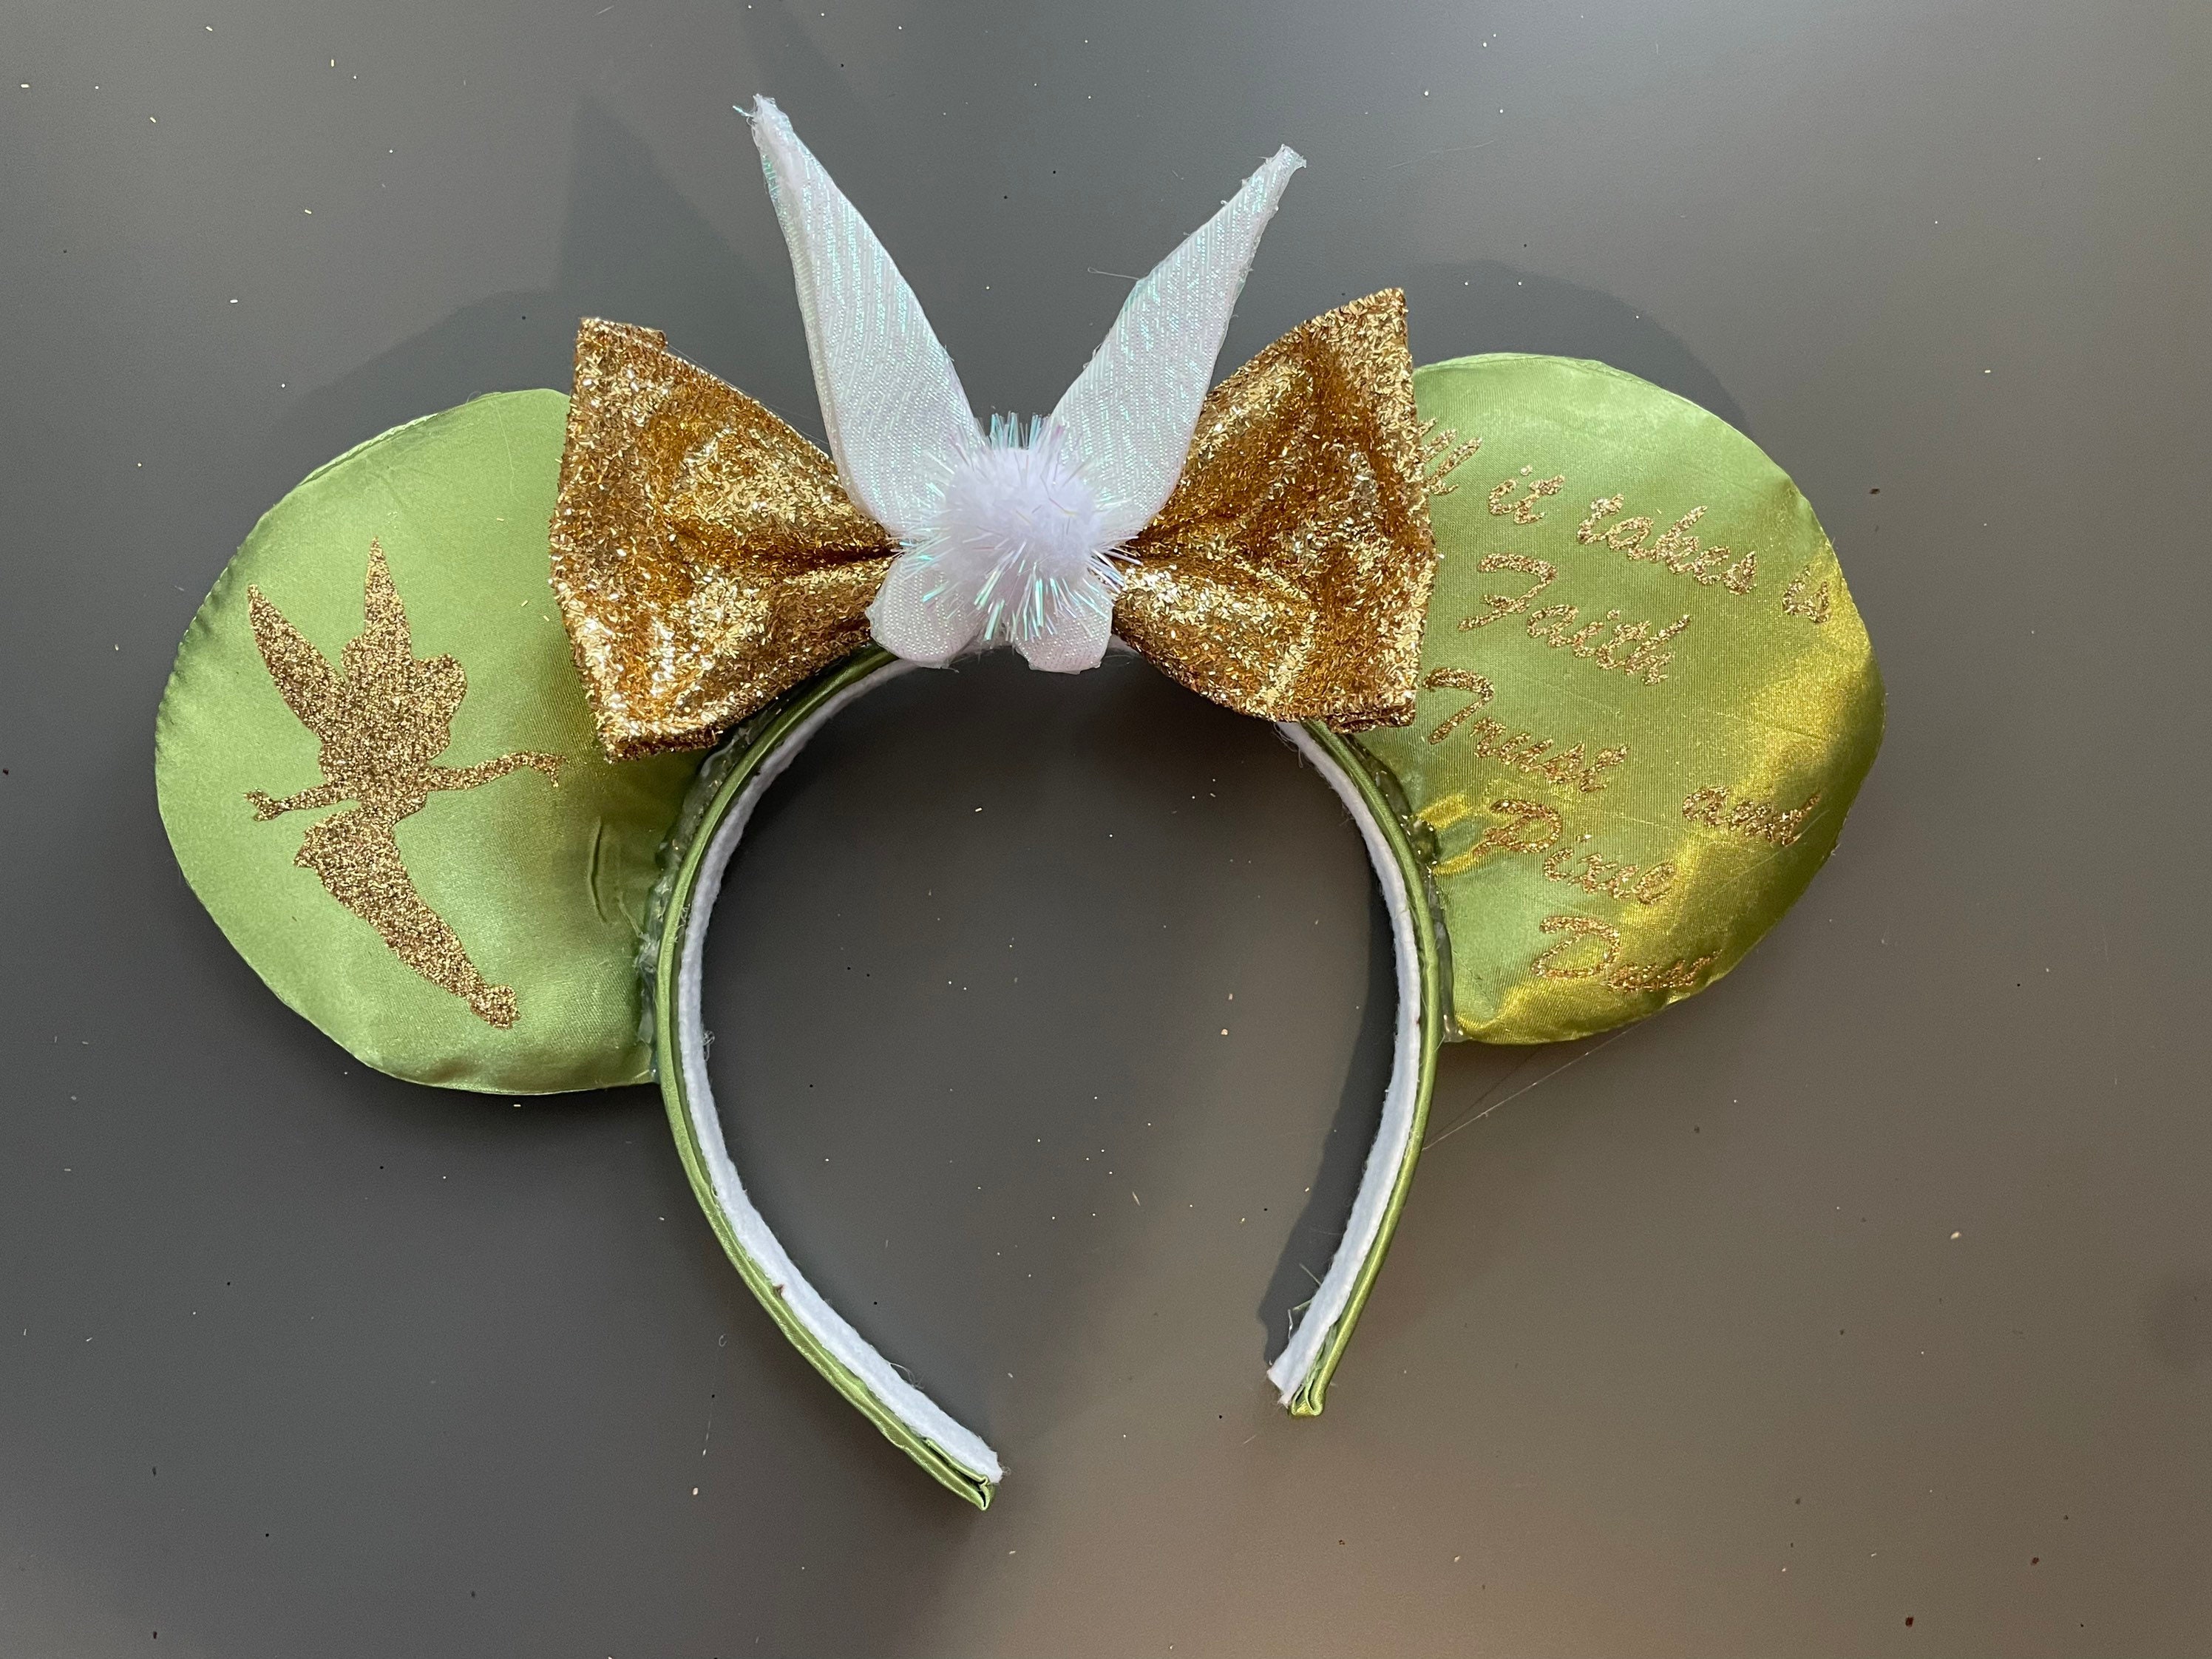 Tinkerbell Peter Pan Inspired Minnie Mouse Ears